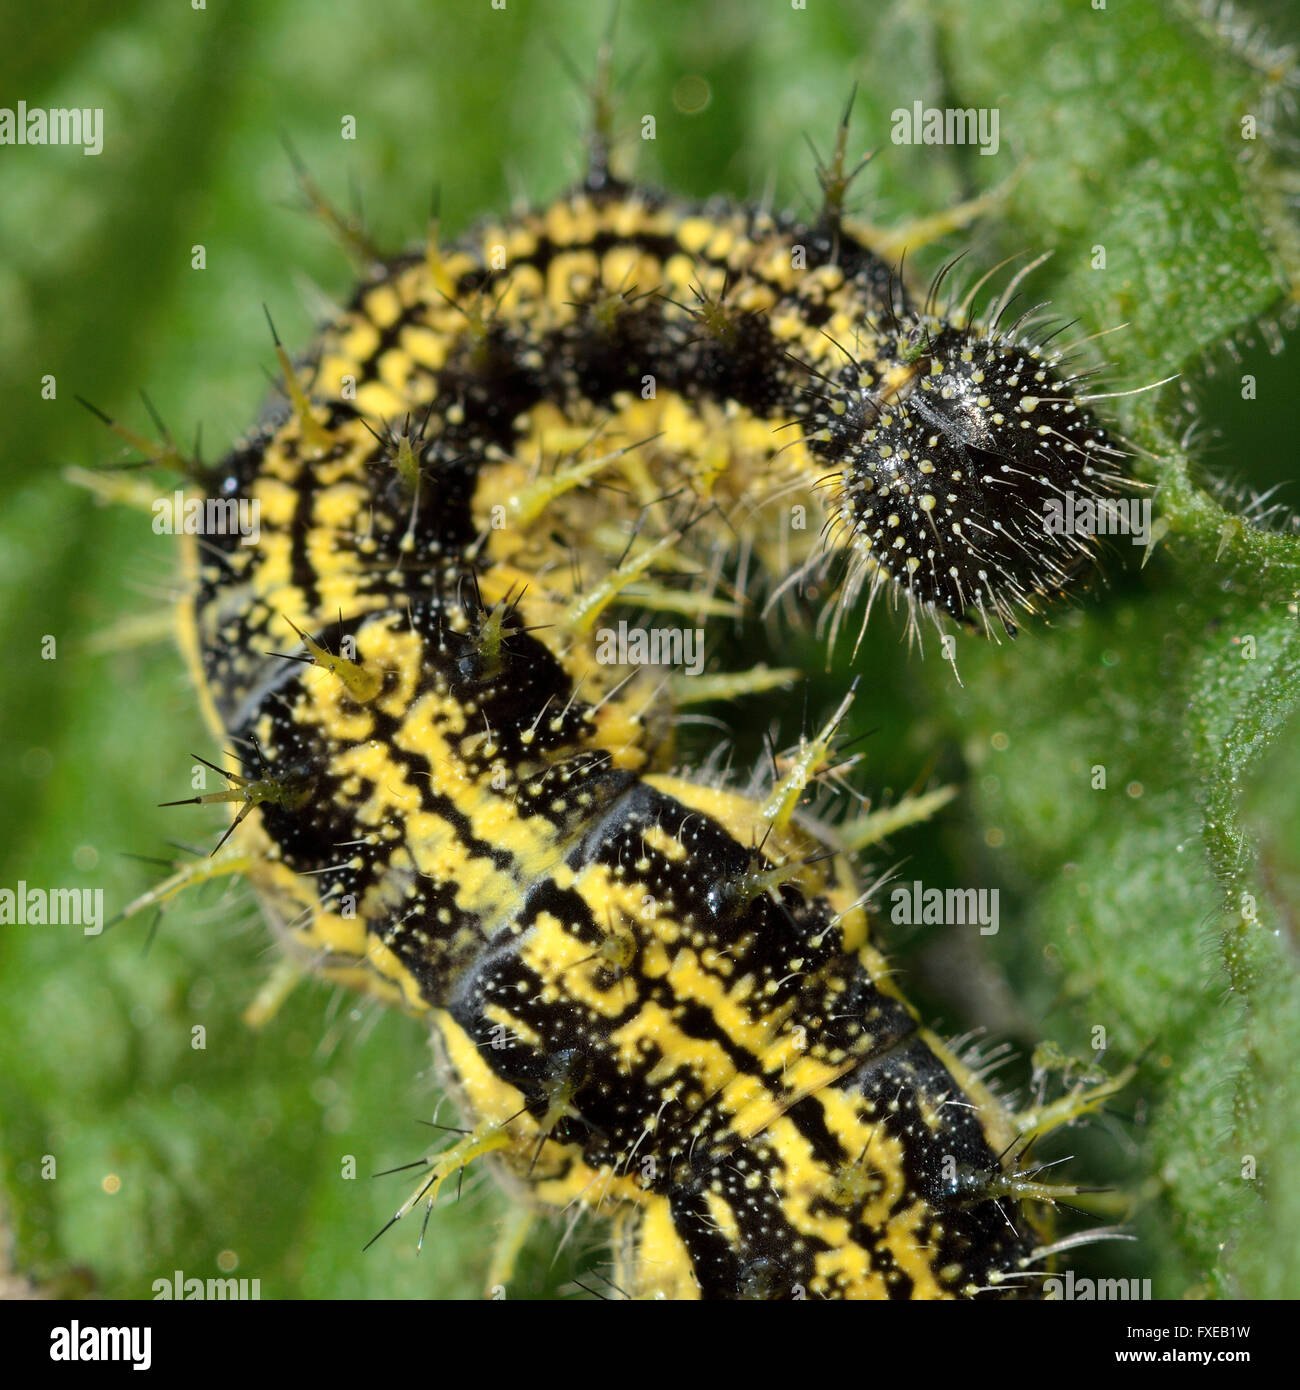 Small tortoiseshell (Aglais urticae) caterpillar. Mature yellow and black spiny larva of butterfly in the family Nymphalidae Stock Photo